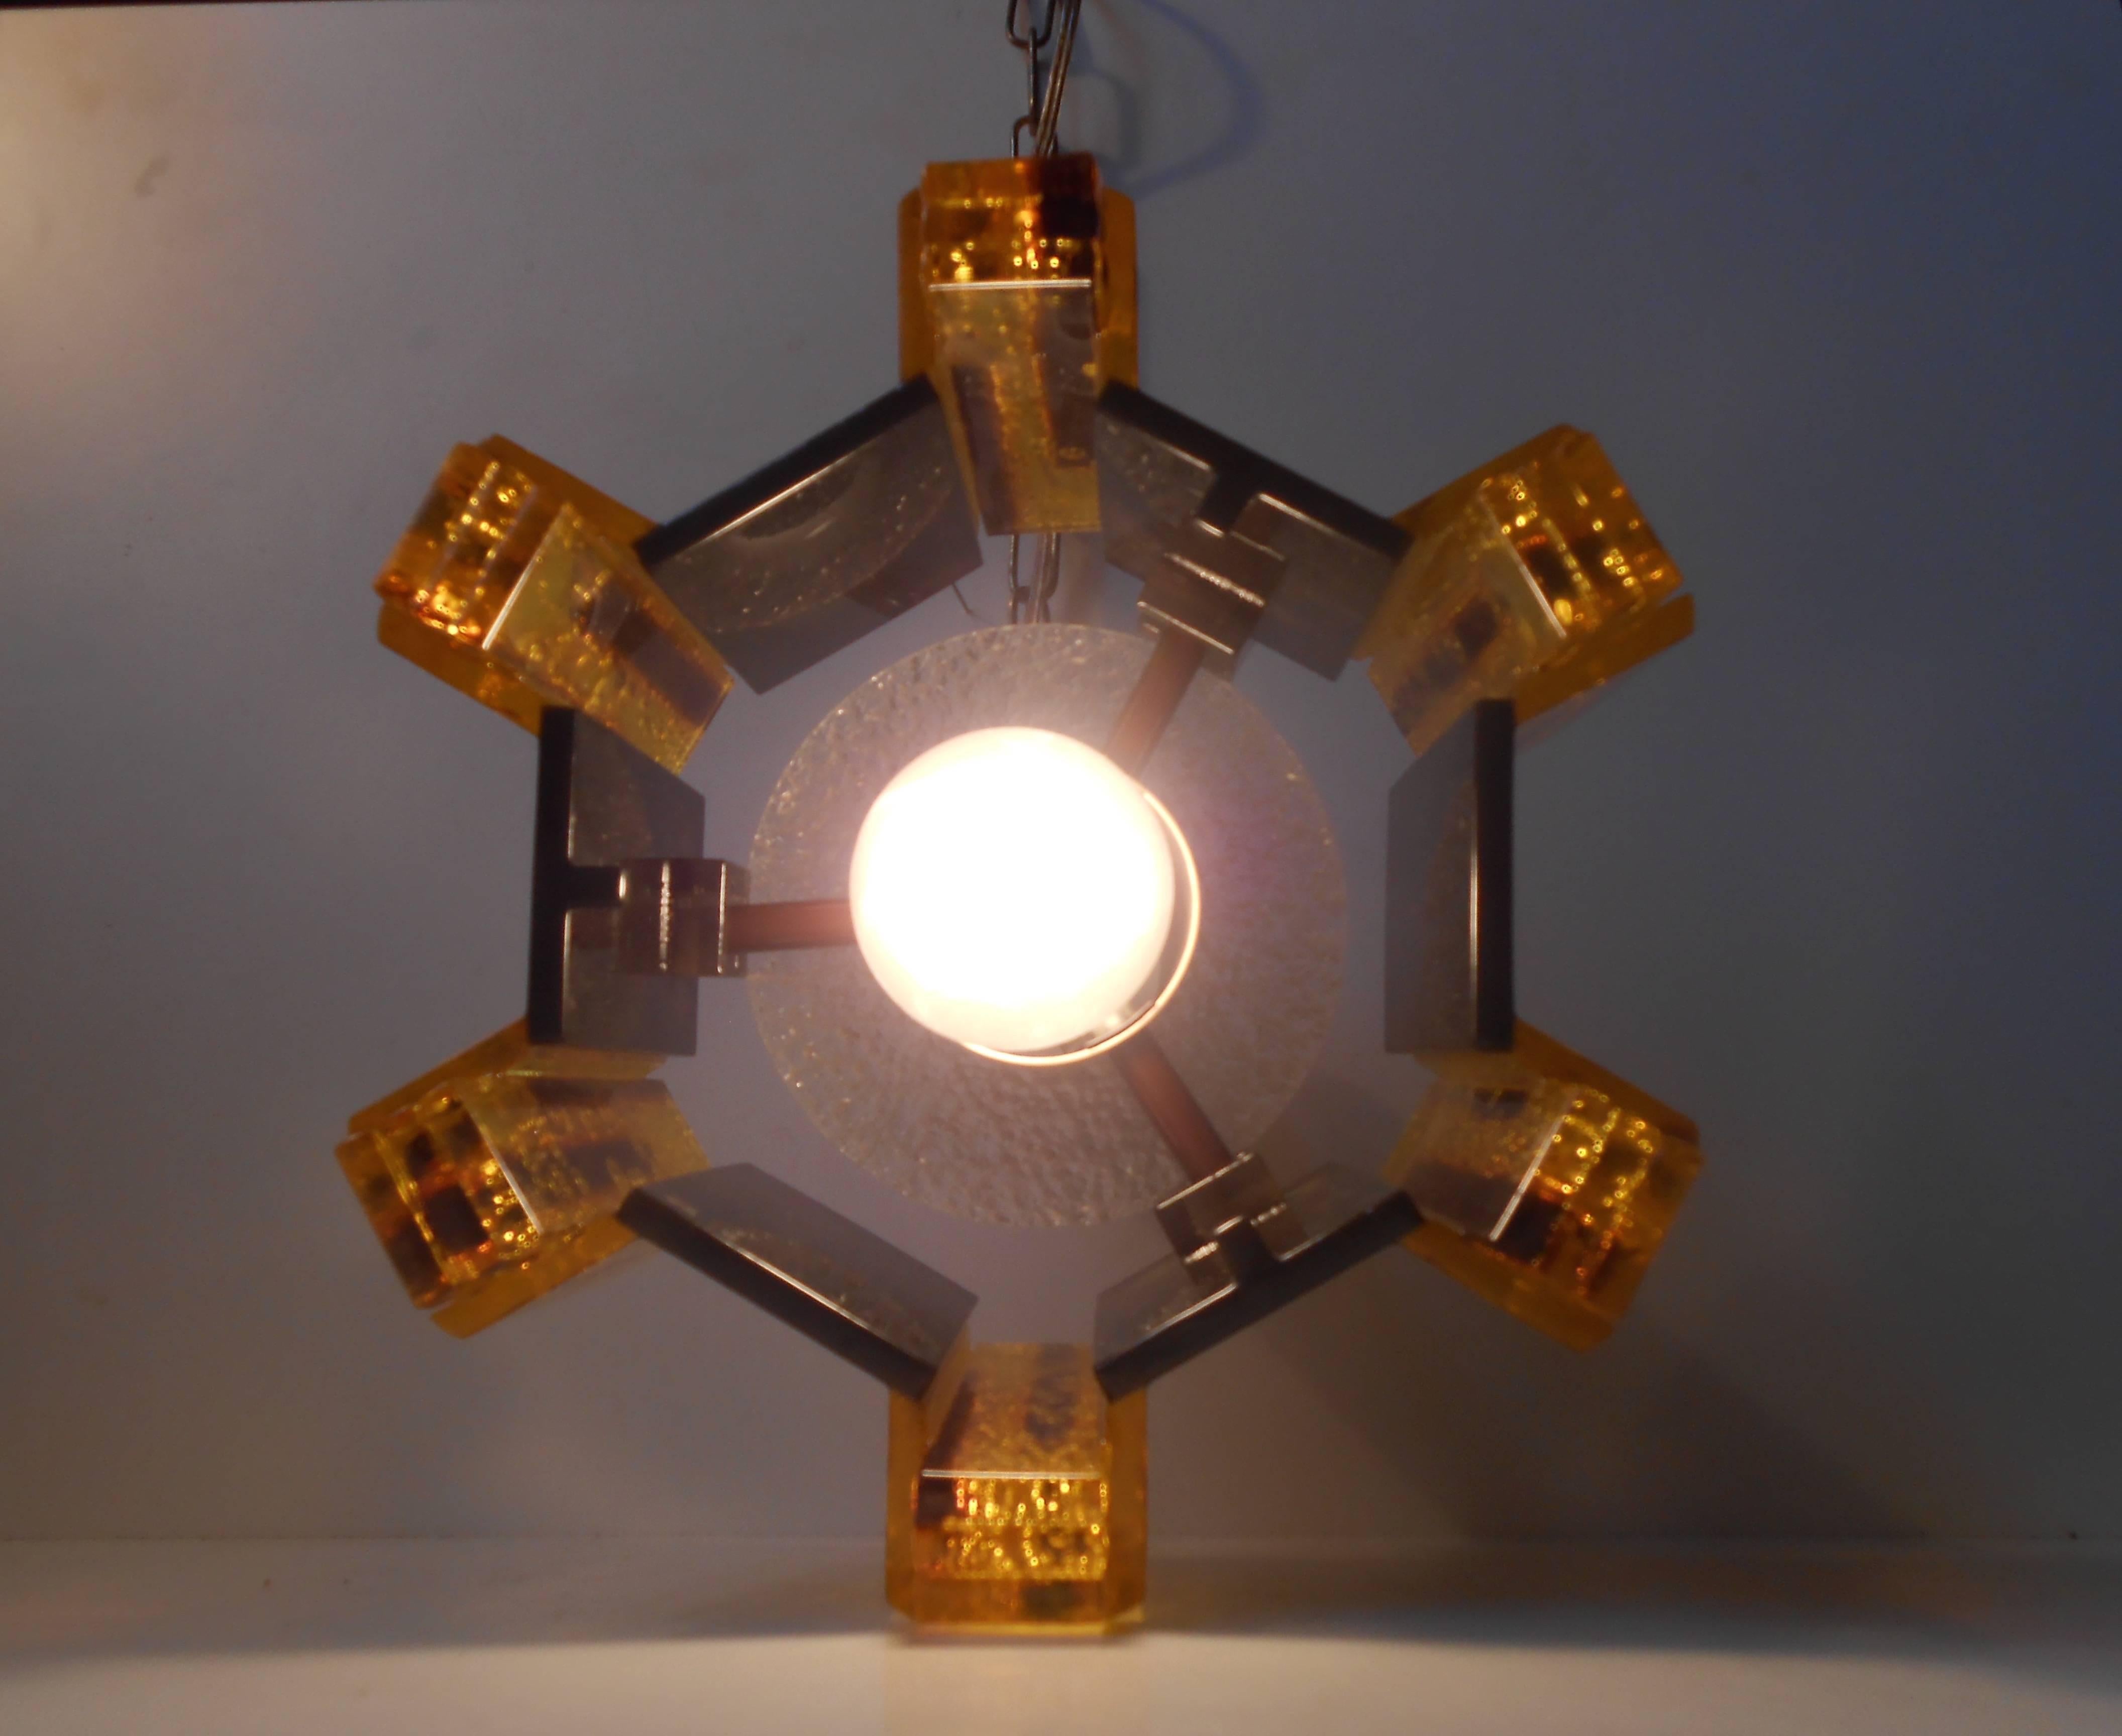 Molded Vintage Claus Bolby Pendant with Brass Details, Danish Modern - a Spacey Twist